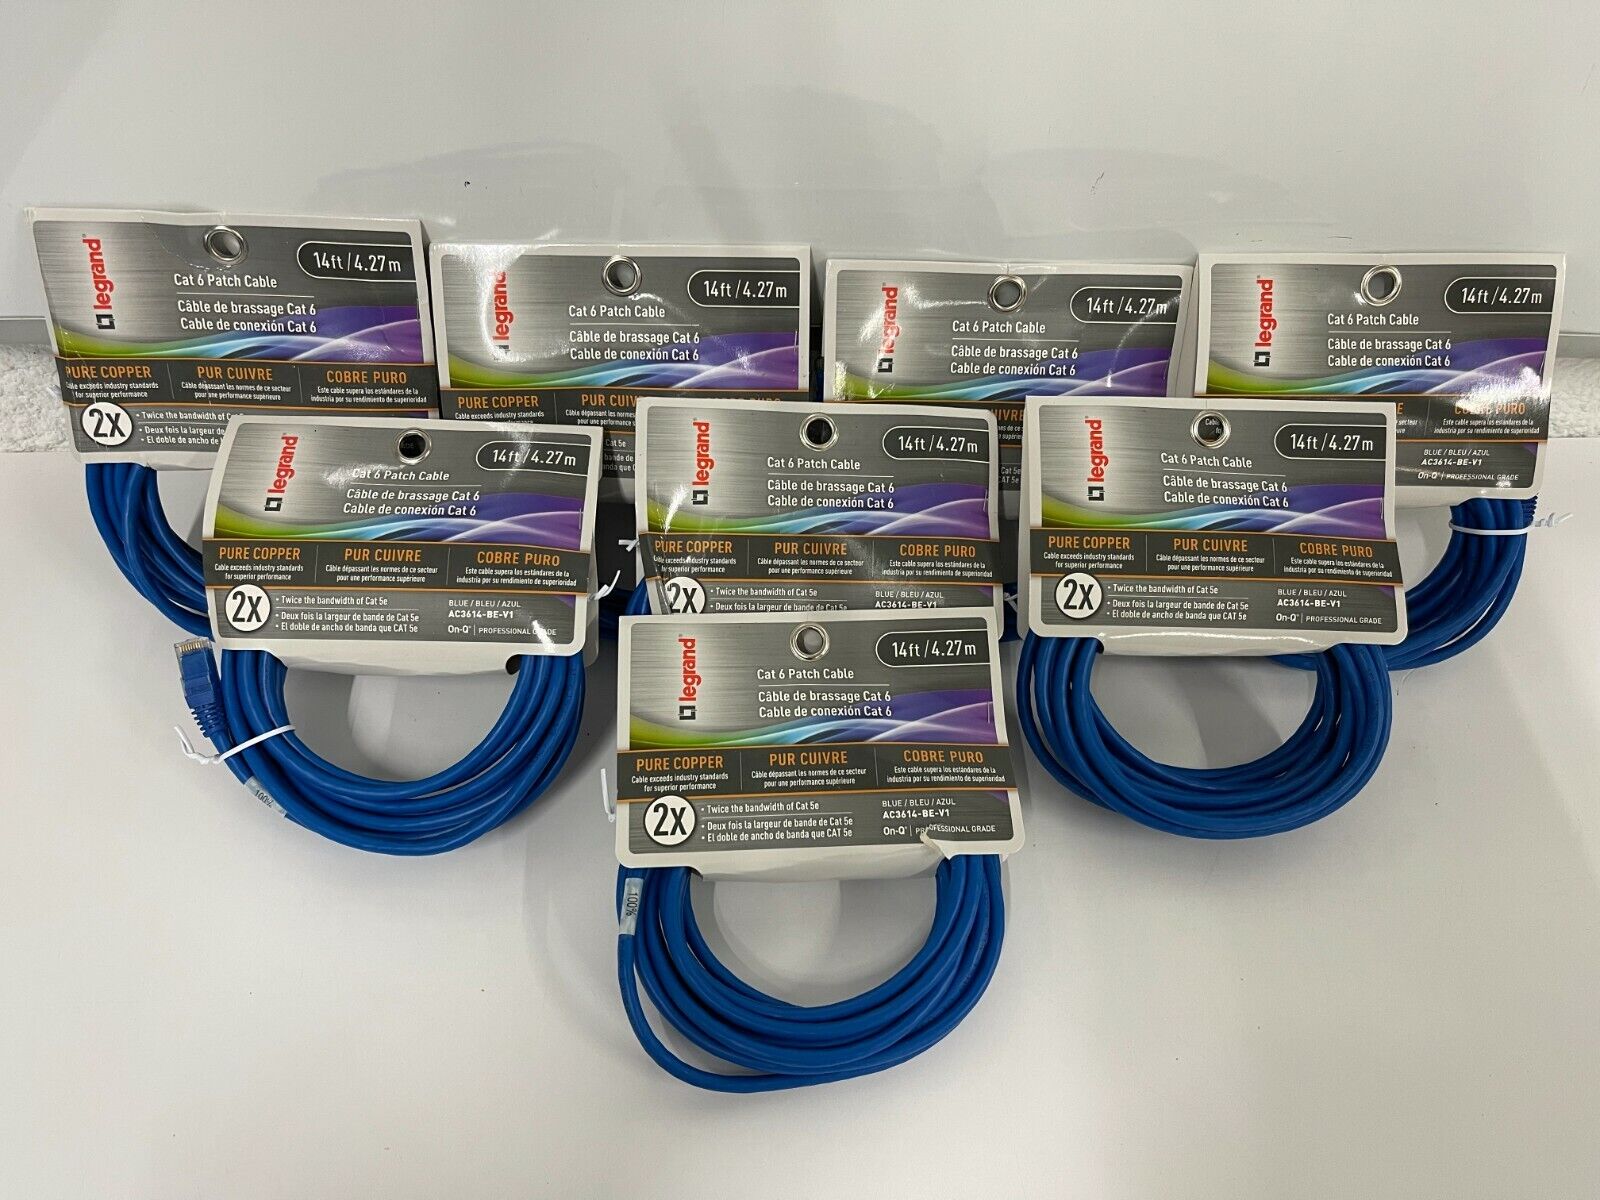 LOT OF 8 Legrand On-Q 14 Foot Cat 6 Patch Cable Blue AC3614BEV1